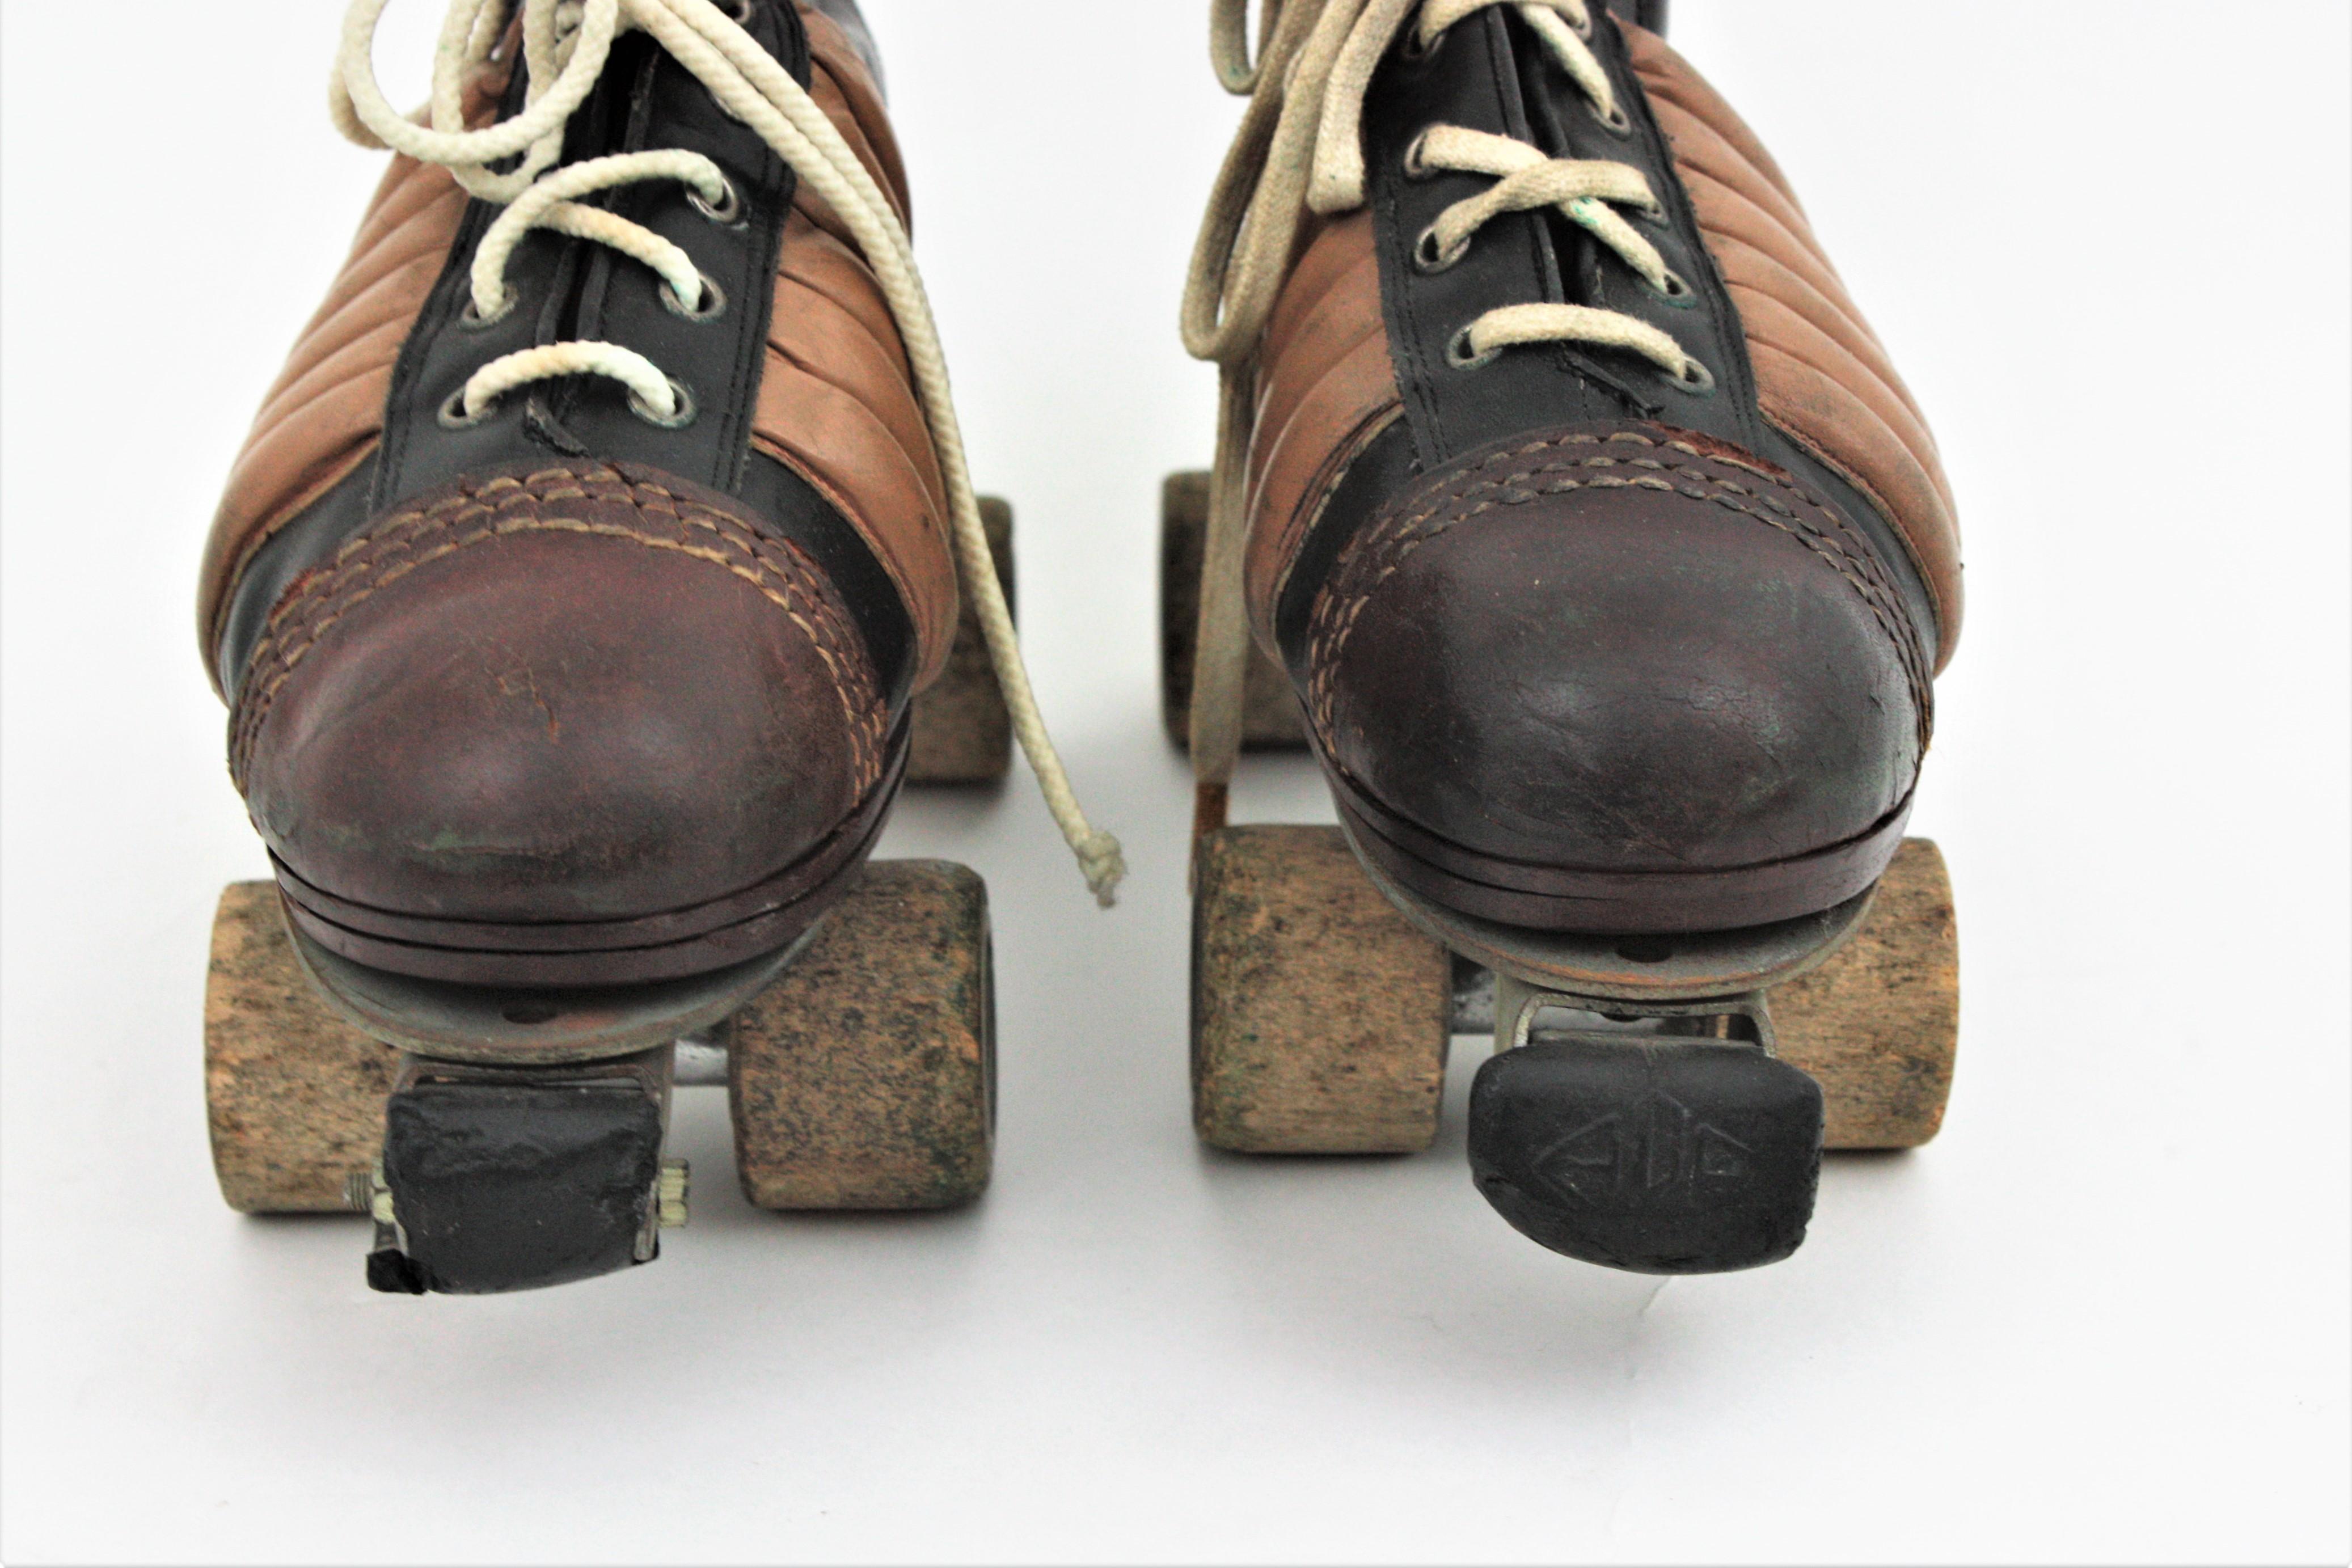 Spanish Vintage Roller Skates by Matollo, 1950s For Sale